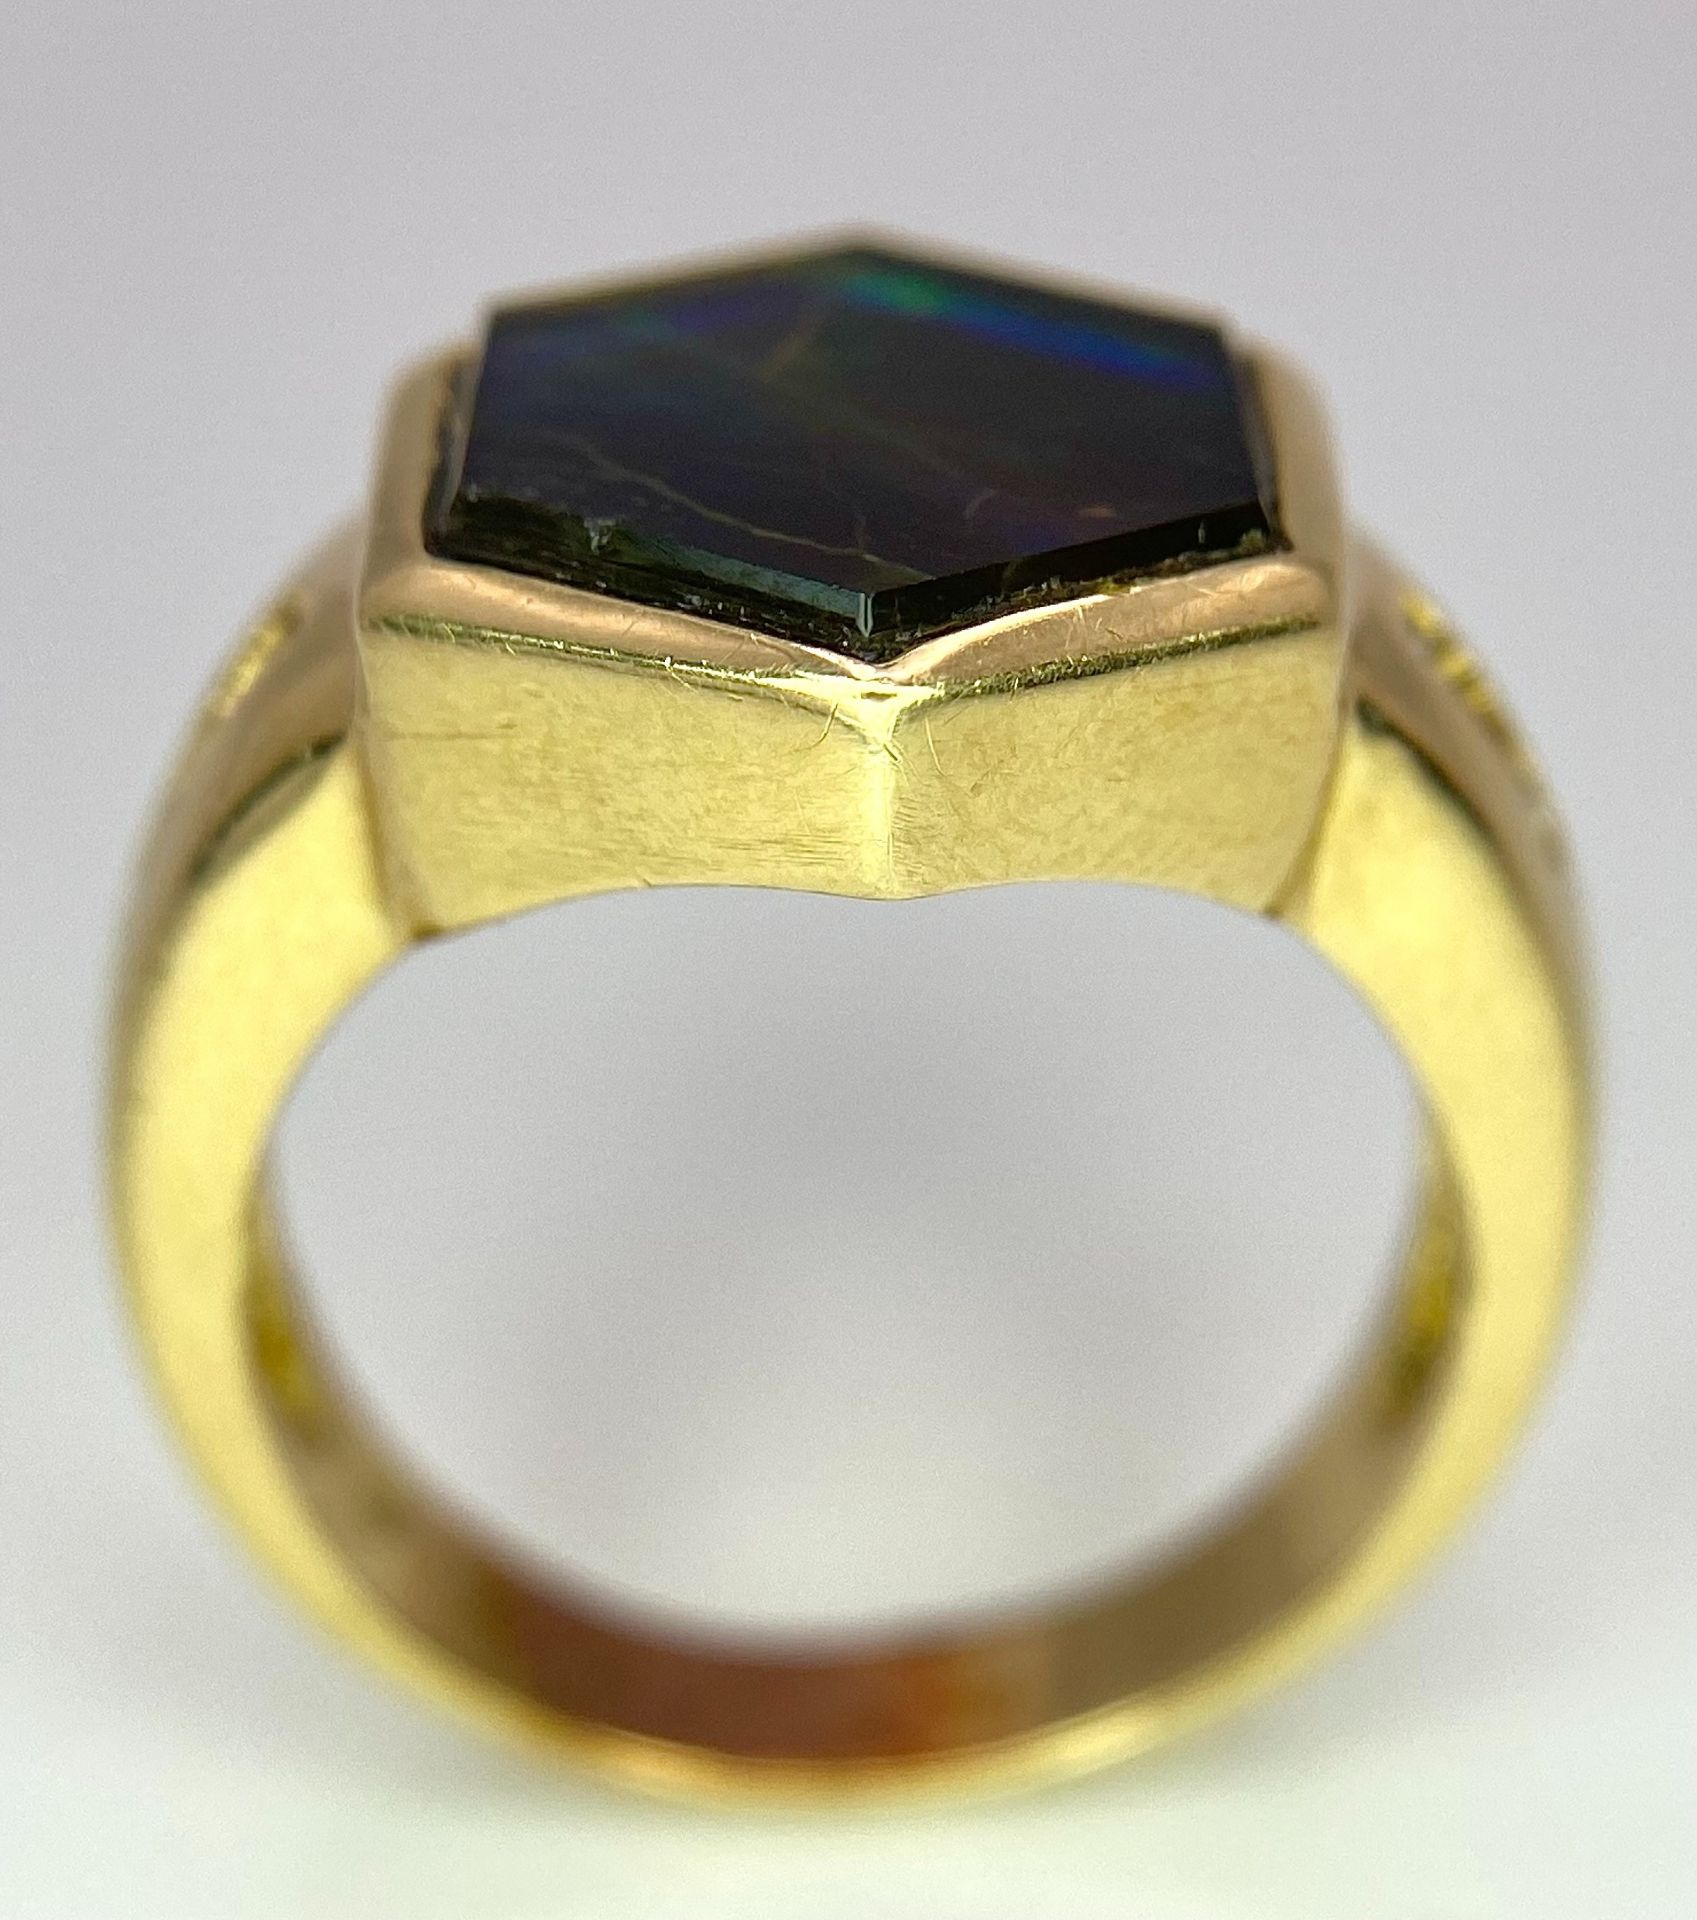 A Very Different, 14K Gold, Ammolite and Diamond Ring. Hexagonal shape. Size L. 6.3g total weight. - Image 8 of 9